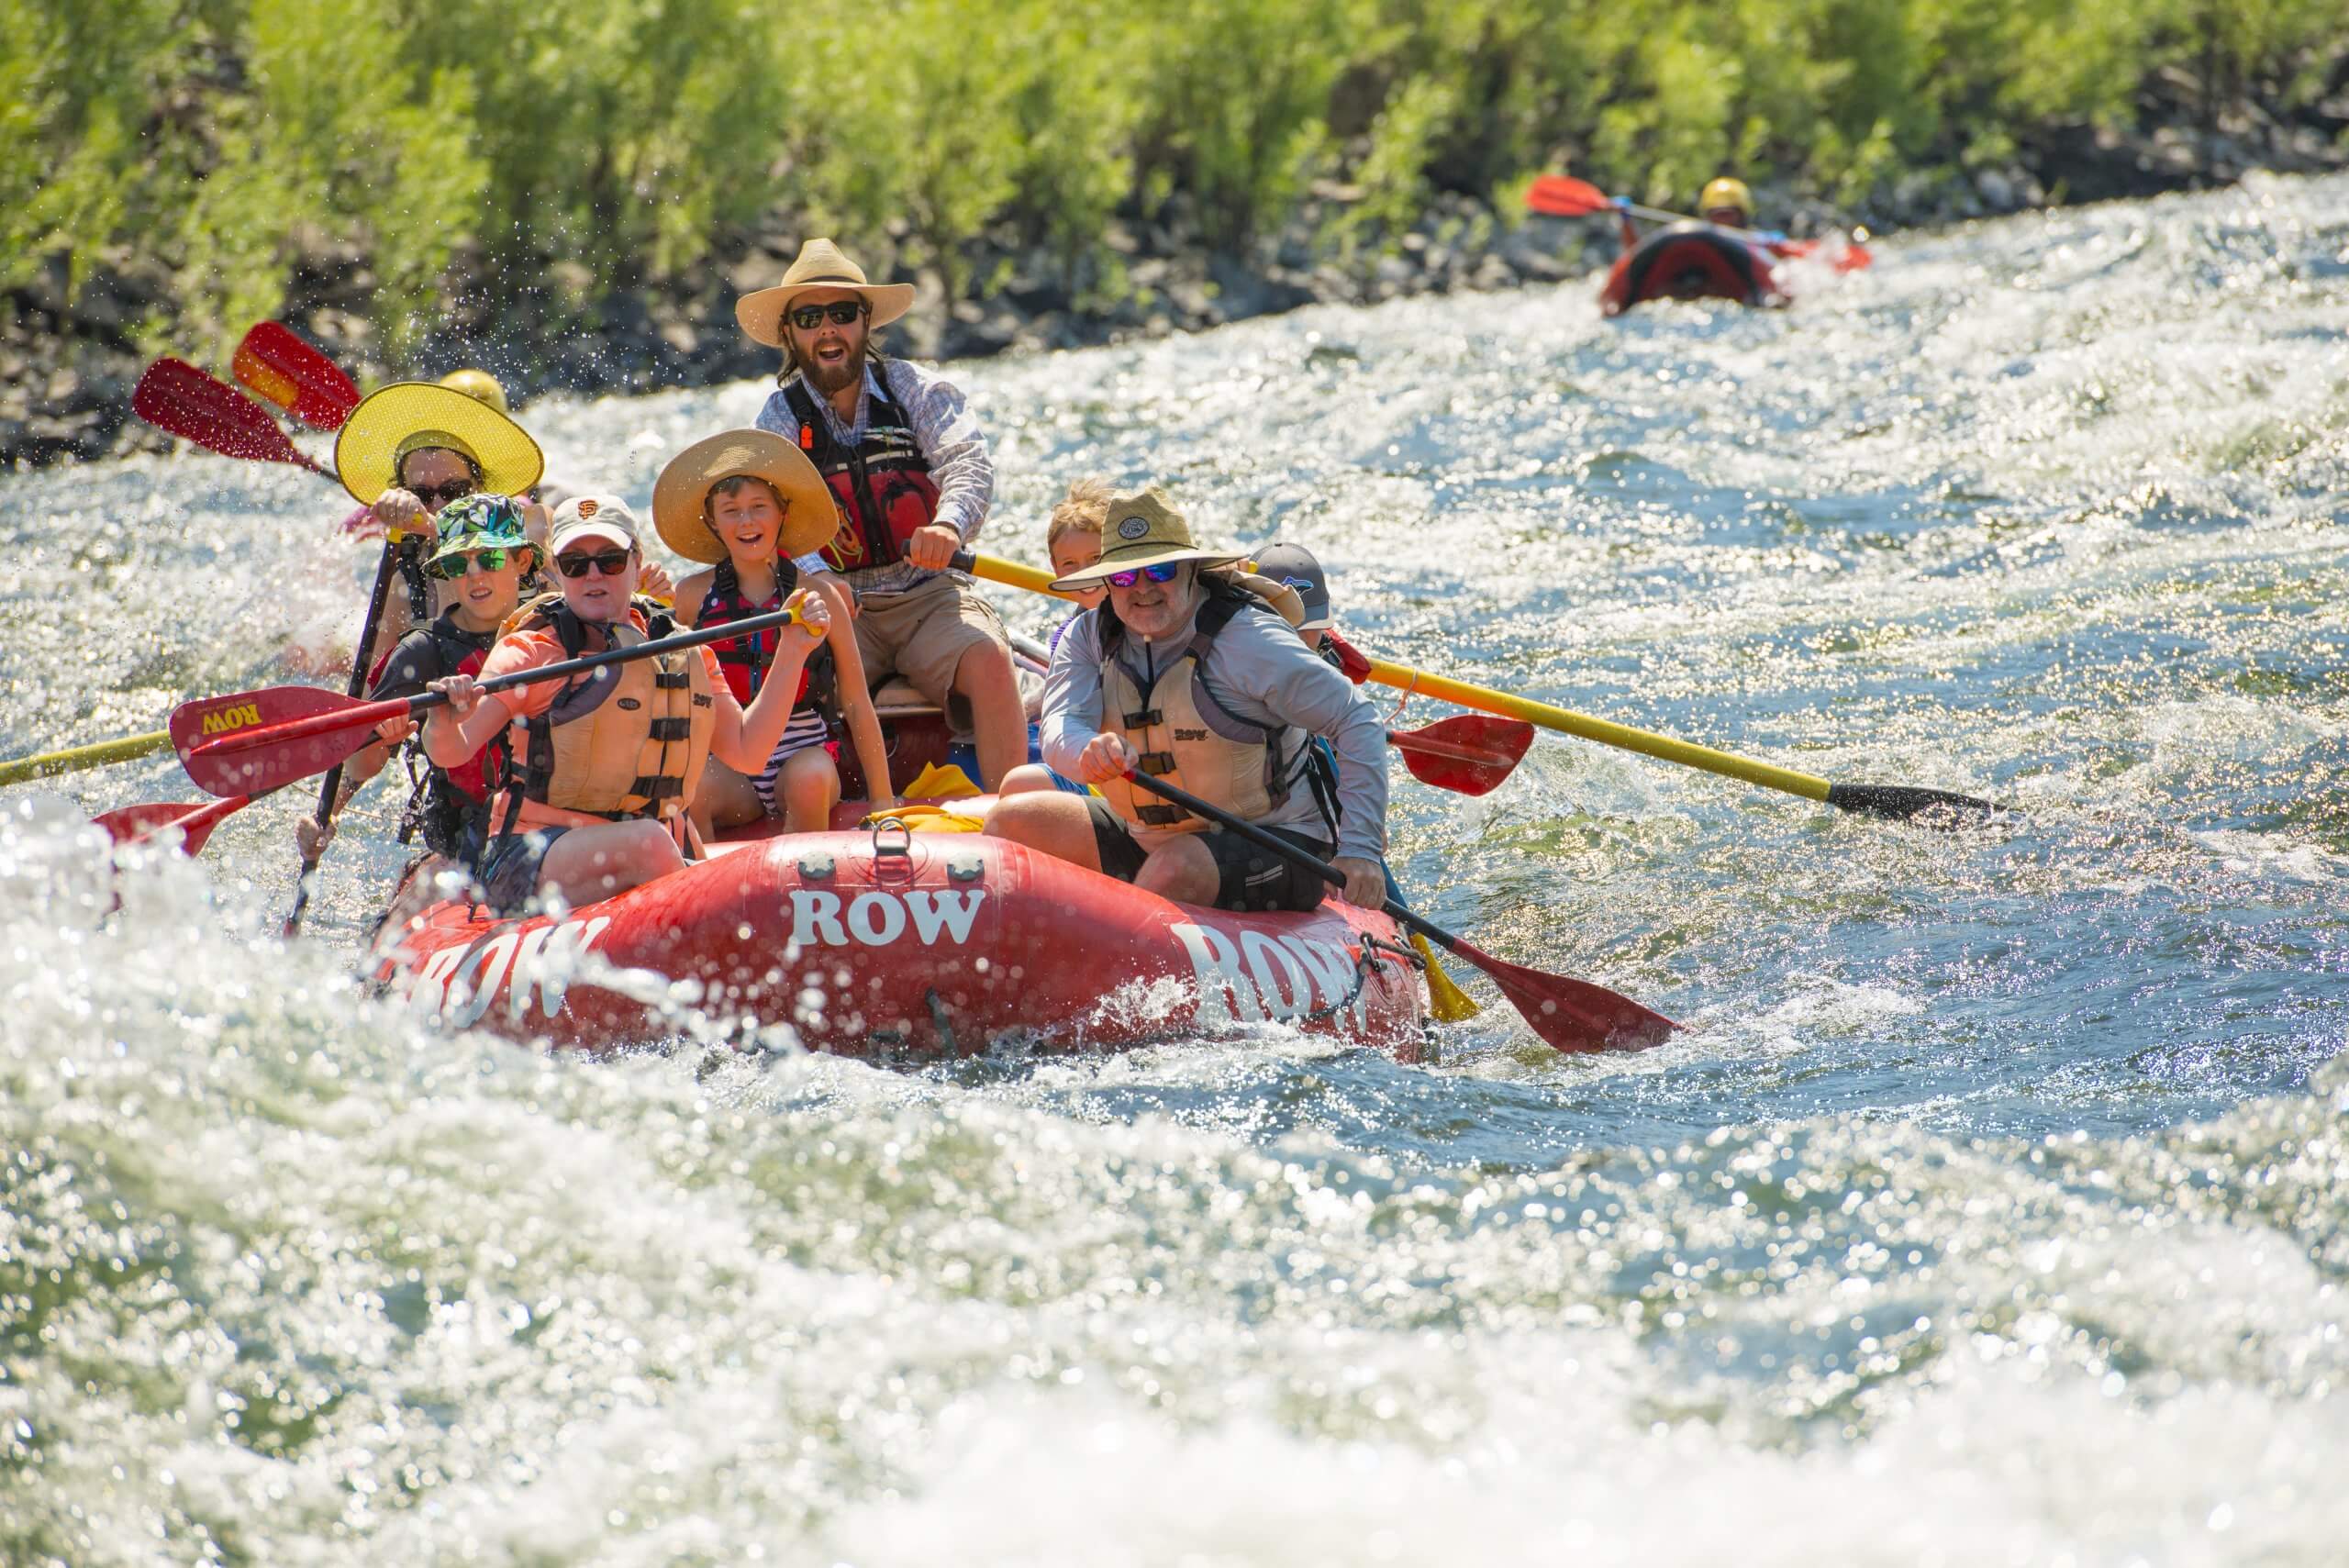 People holding paddles on a red raft navigate through white water in the Lower Salmon Canyon.